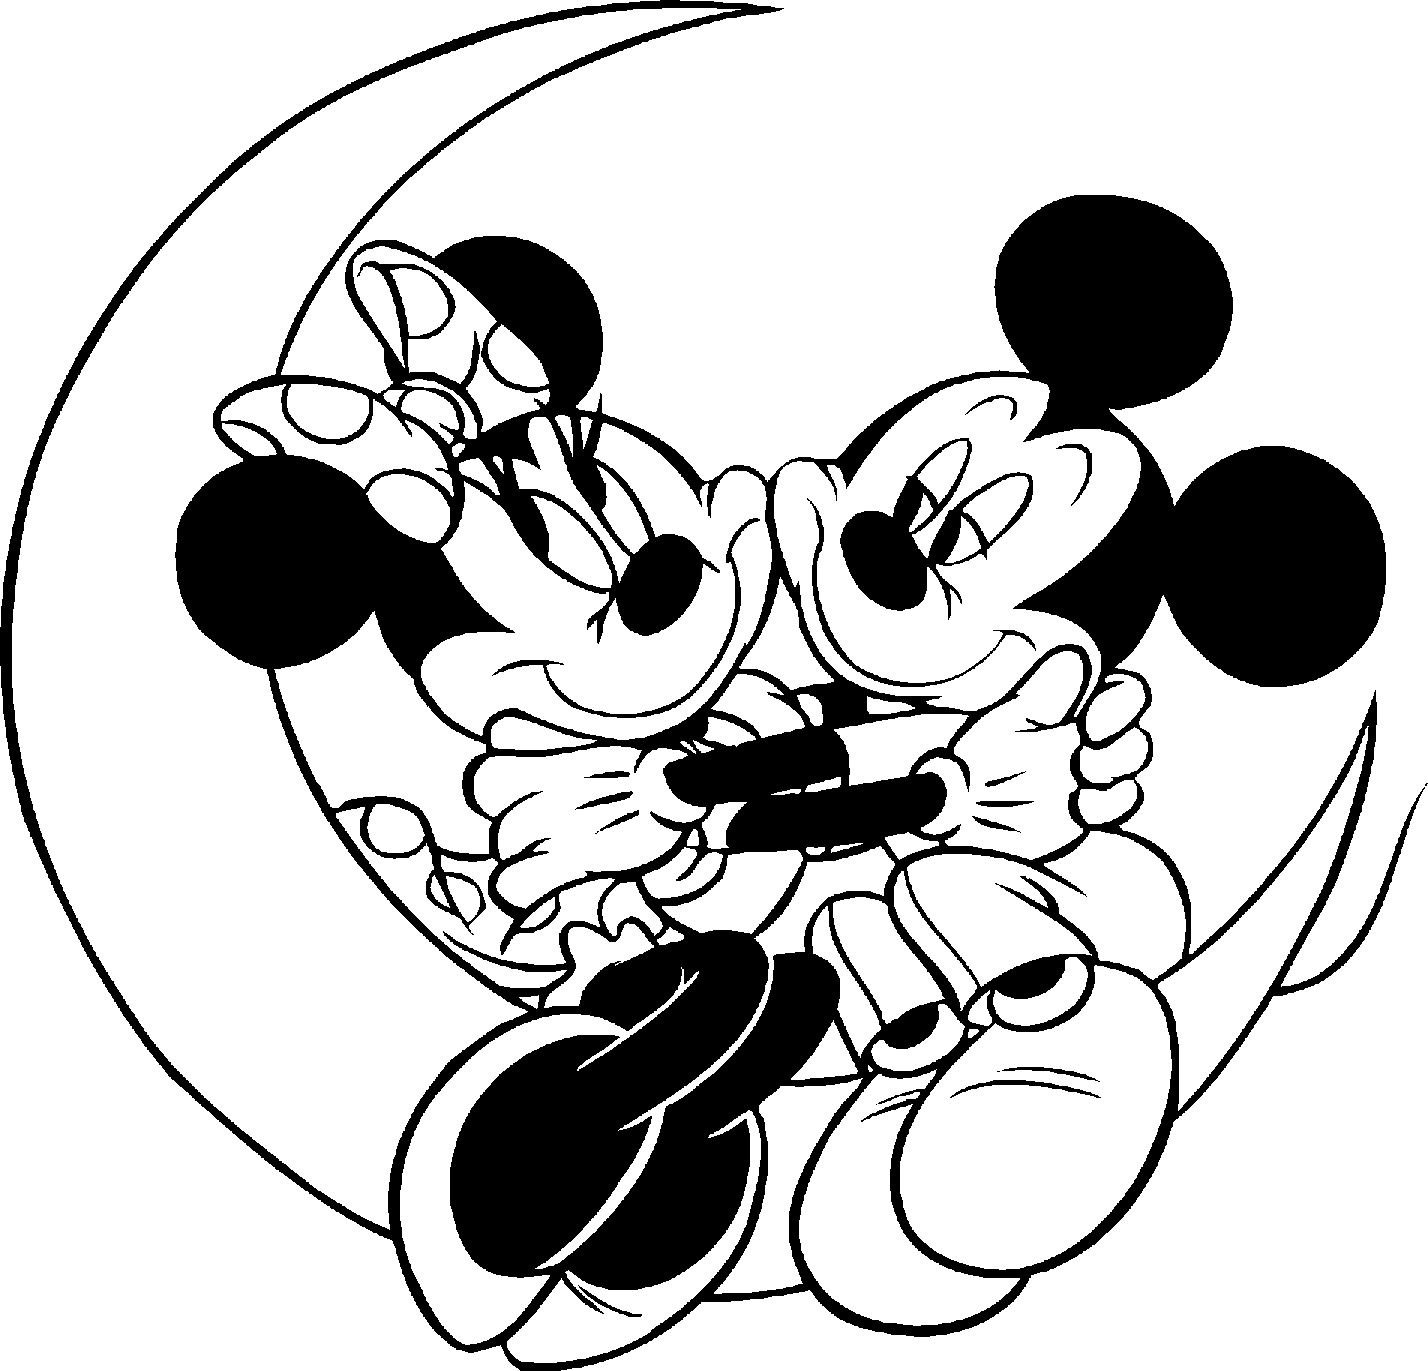 minnie mouse coloring pages free free disney minnie mouse coloring pages mouse free pages minnie coloring 